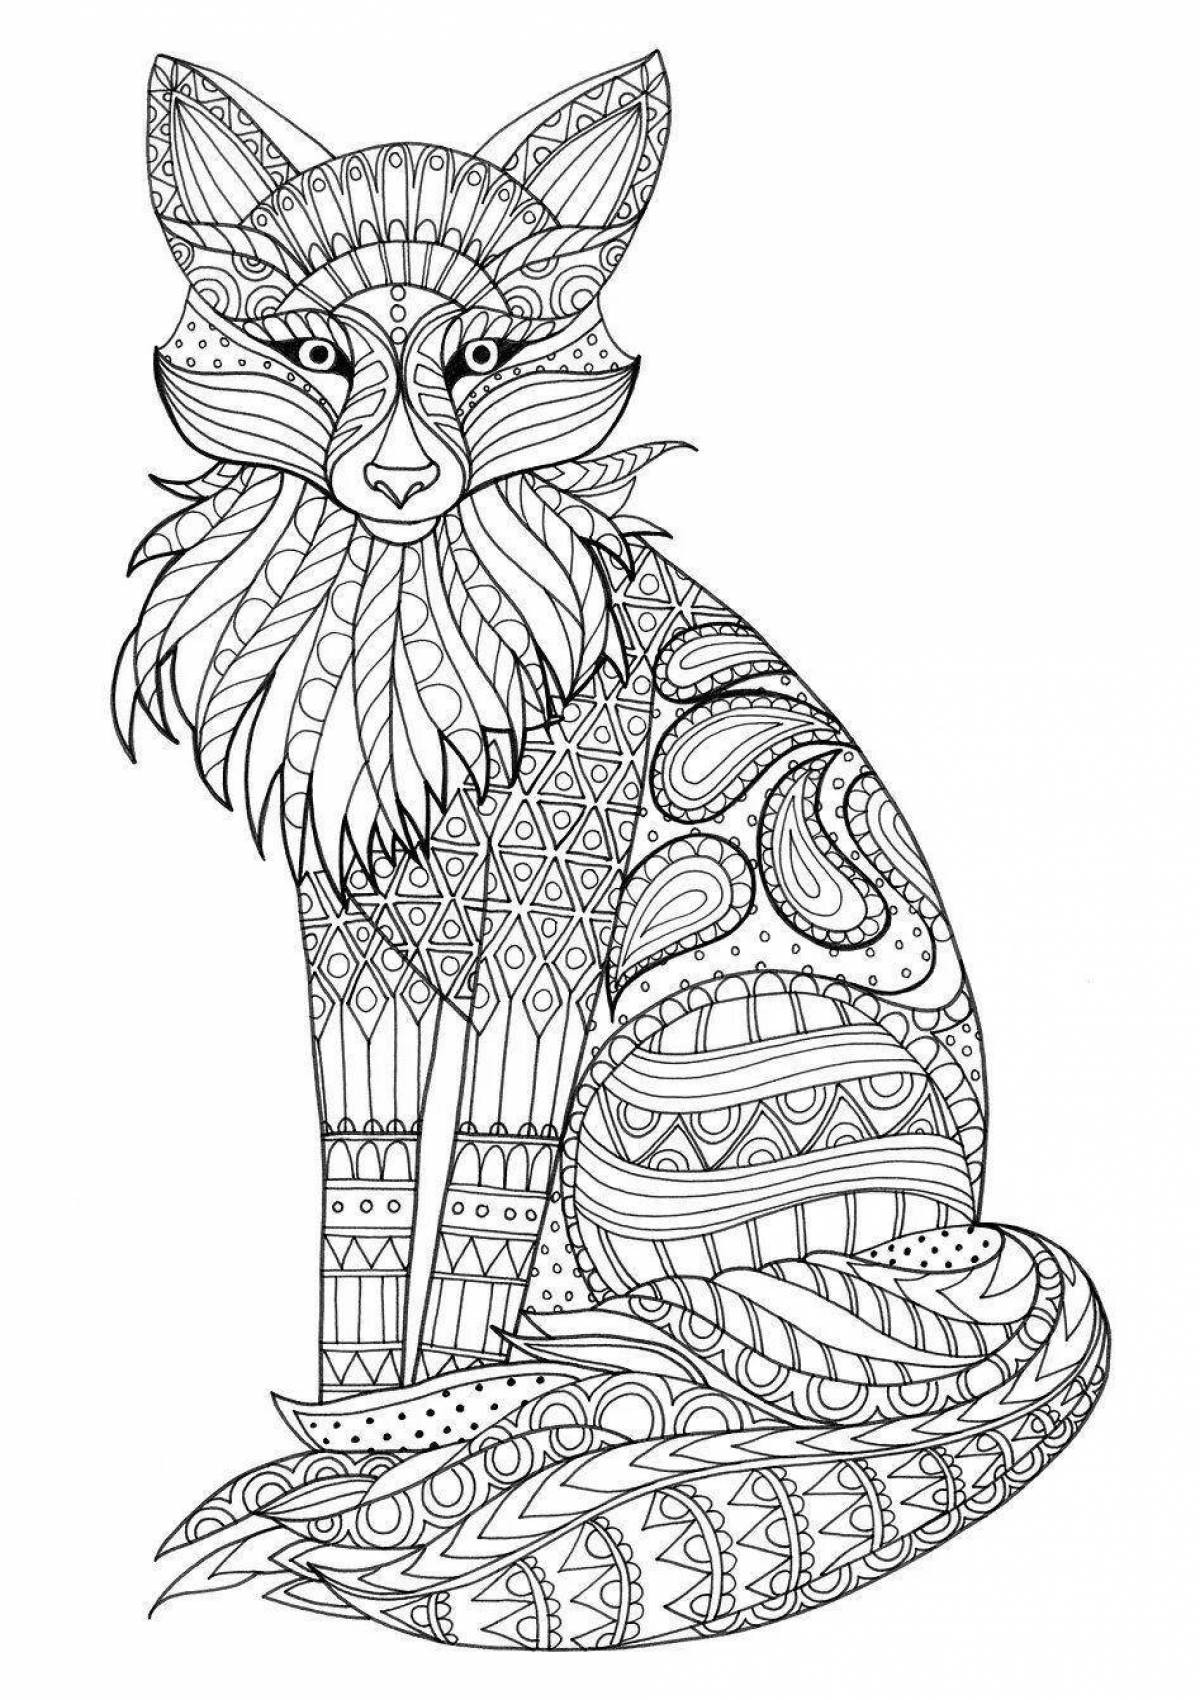 Fairytale antistress coloring book for girls animals